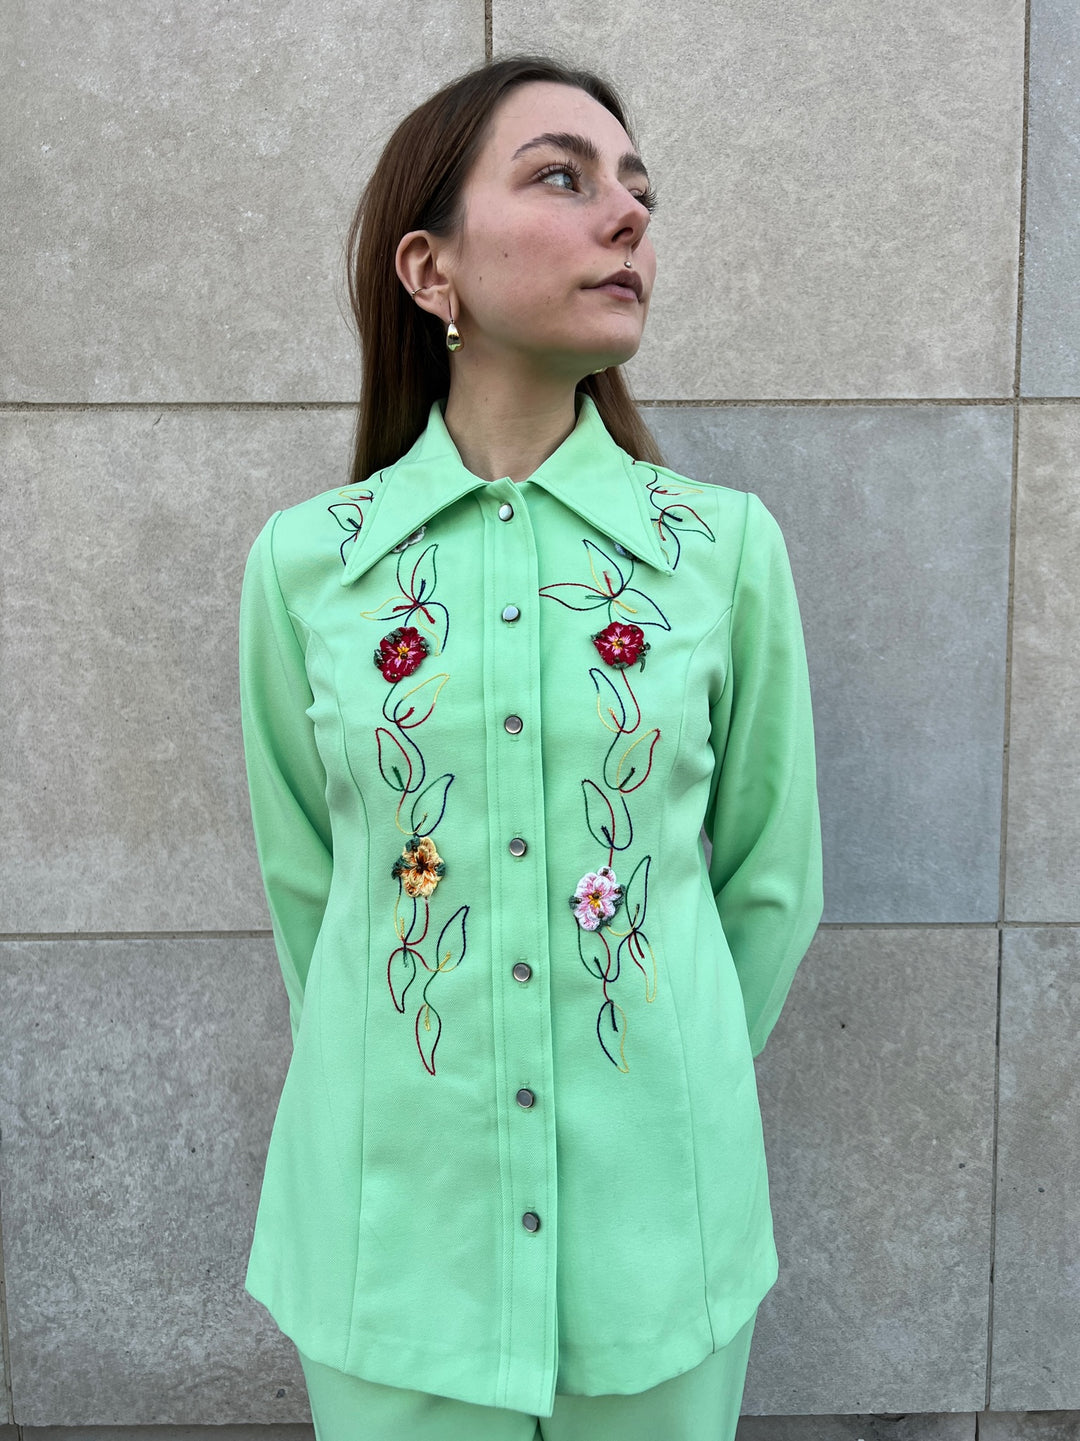 70s Green Polyester Western Pant Suit, Embroidered